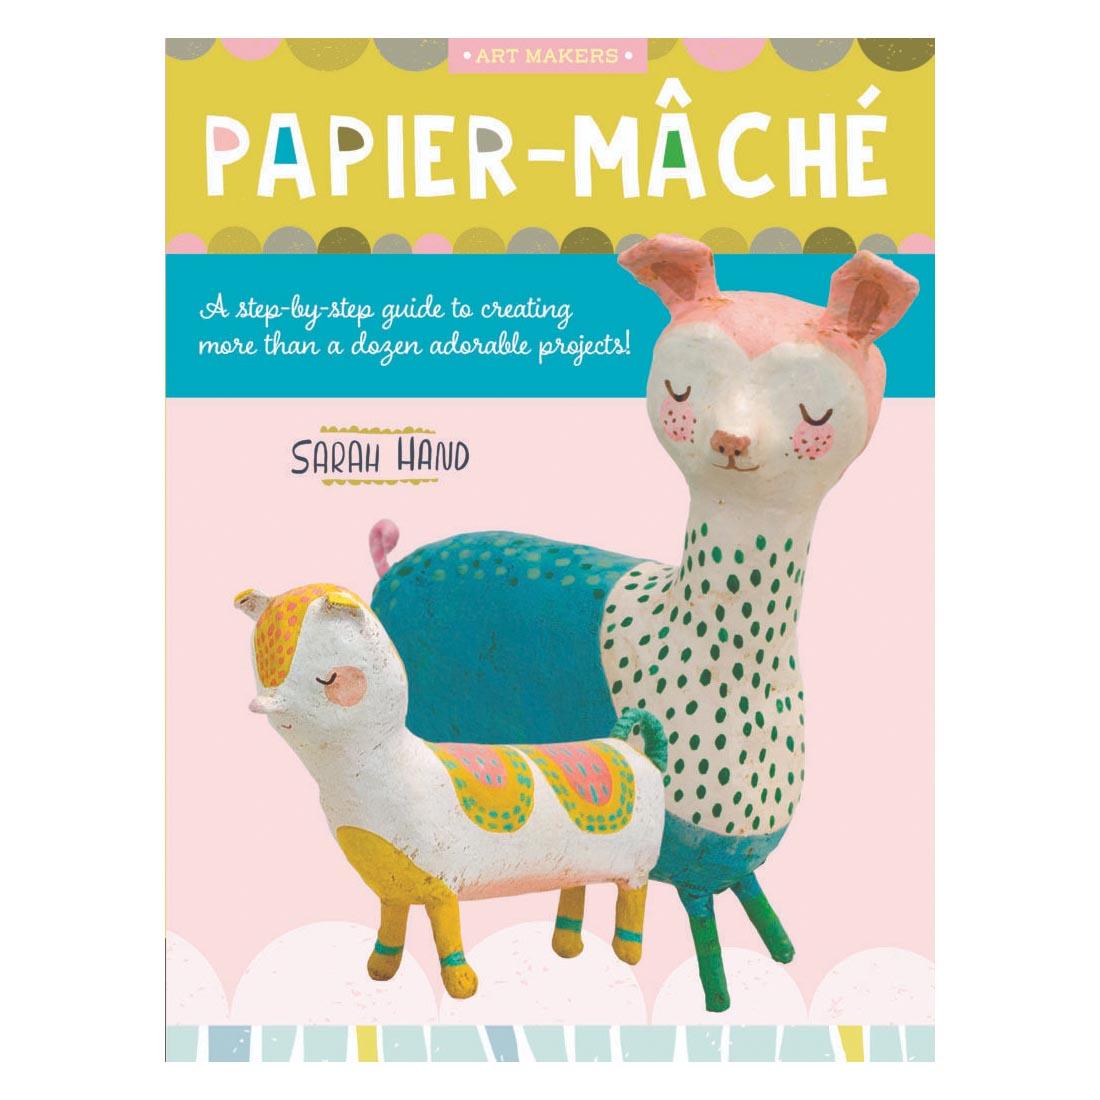 cover of book - Papier-Mache, by Sarah Hand